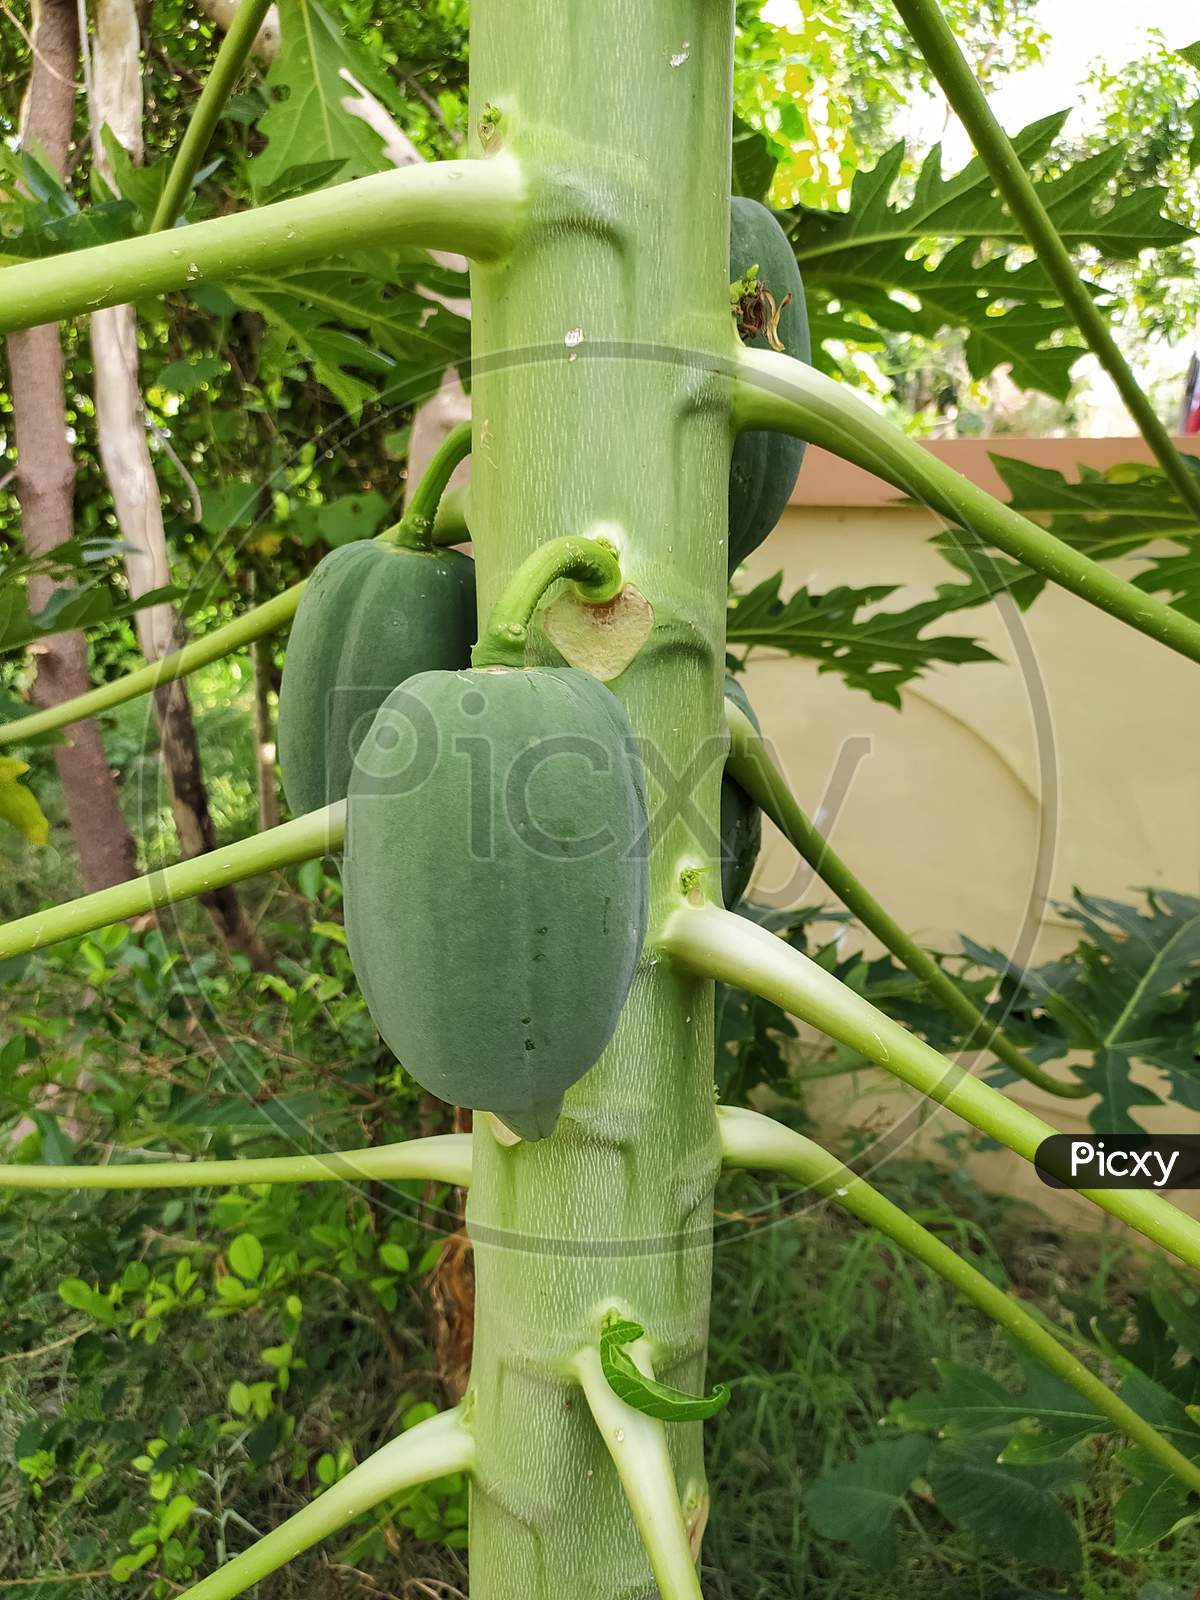 Organic Green Papaya on The Tree in Garden Branch of Plant, Plant or Fruit from India.